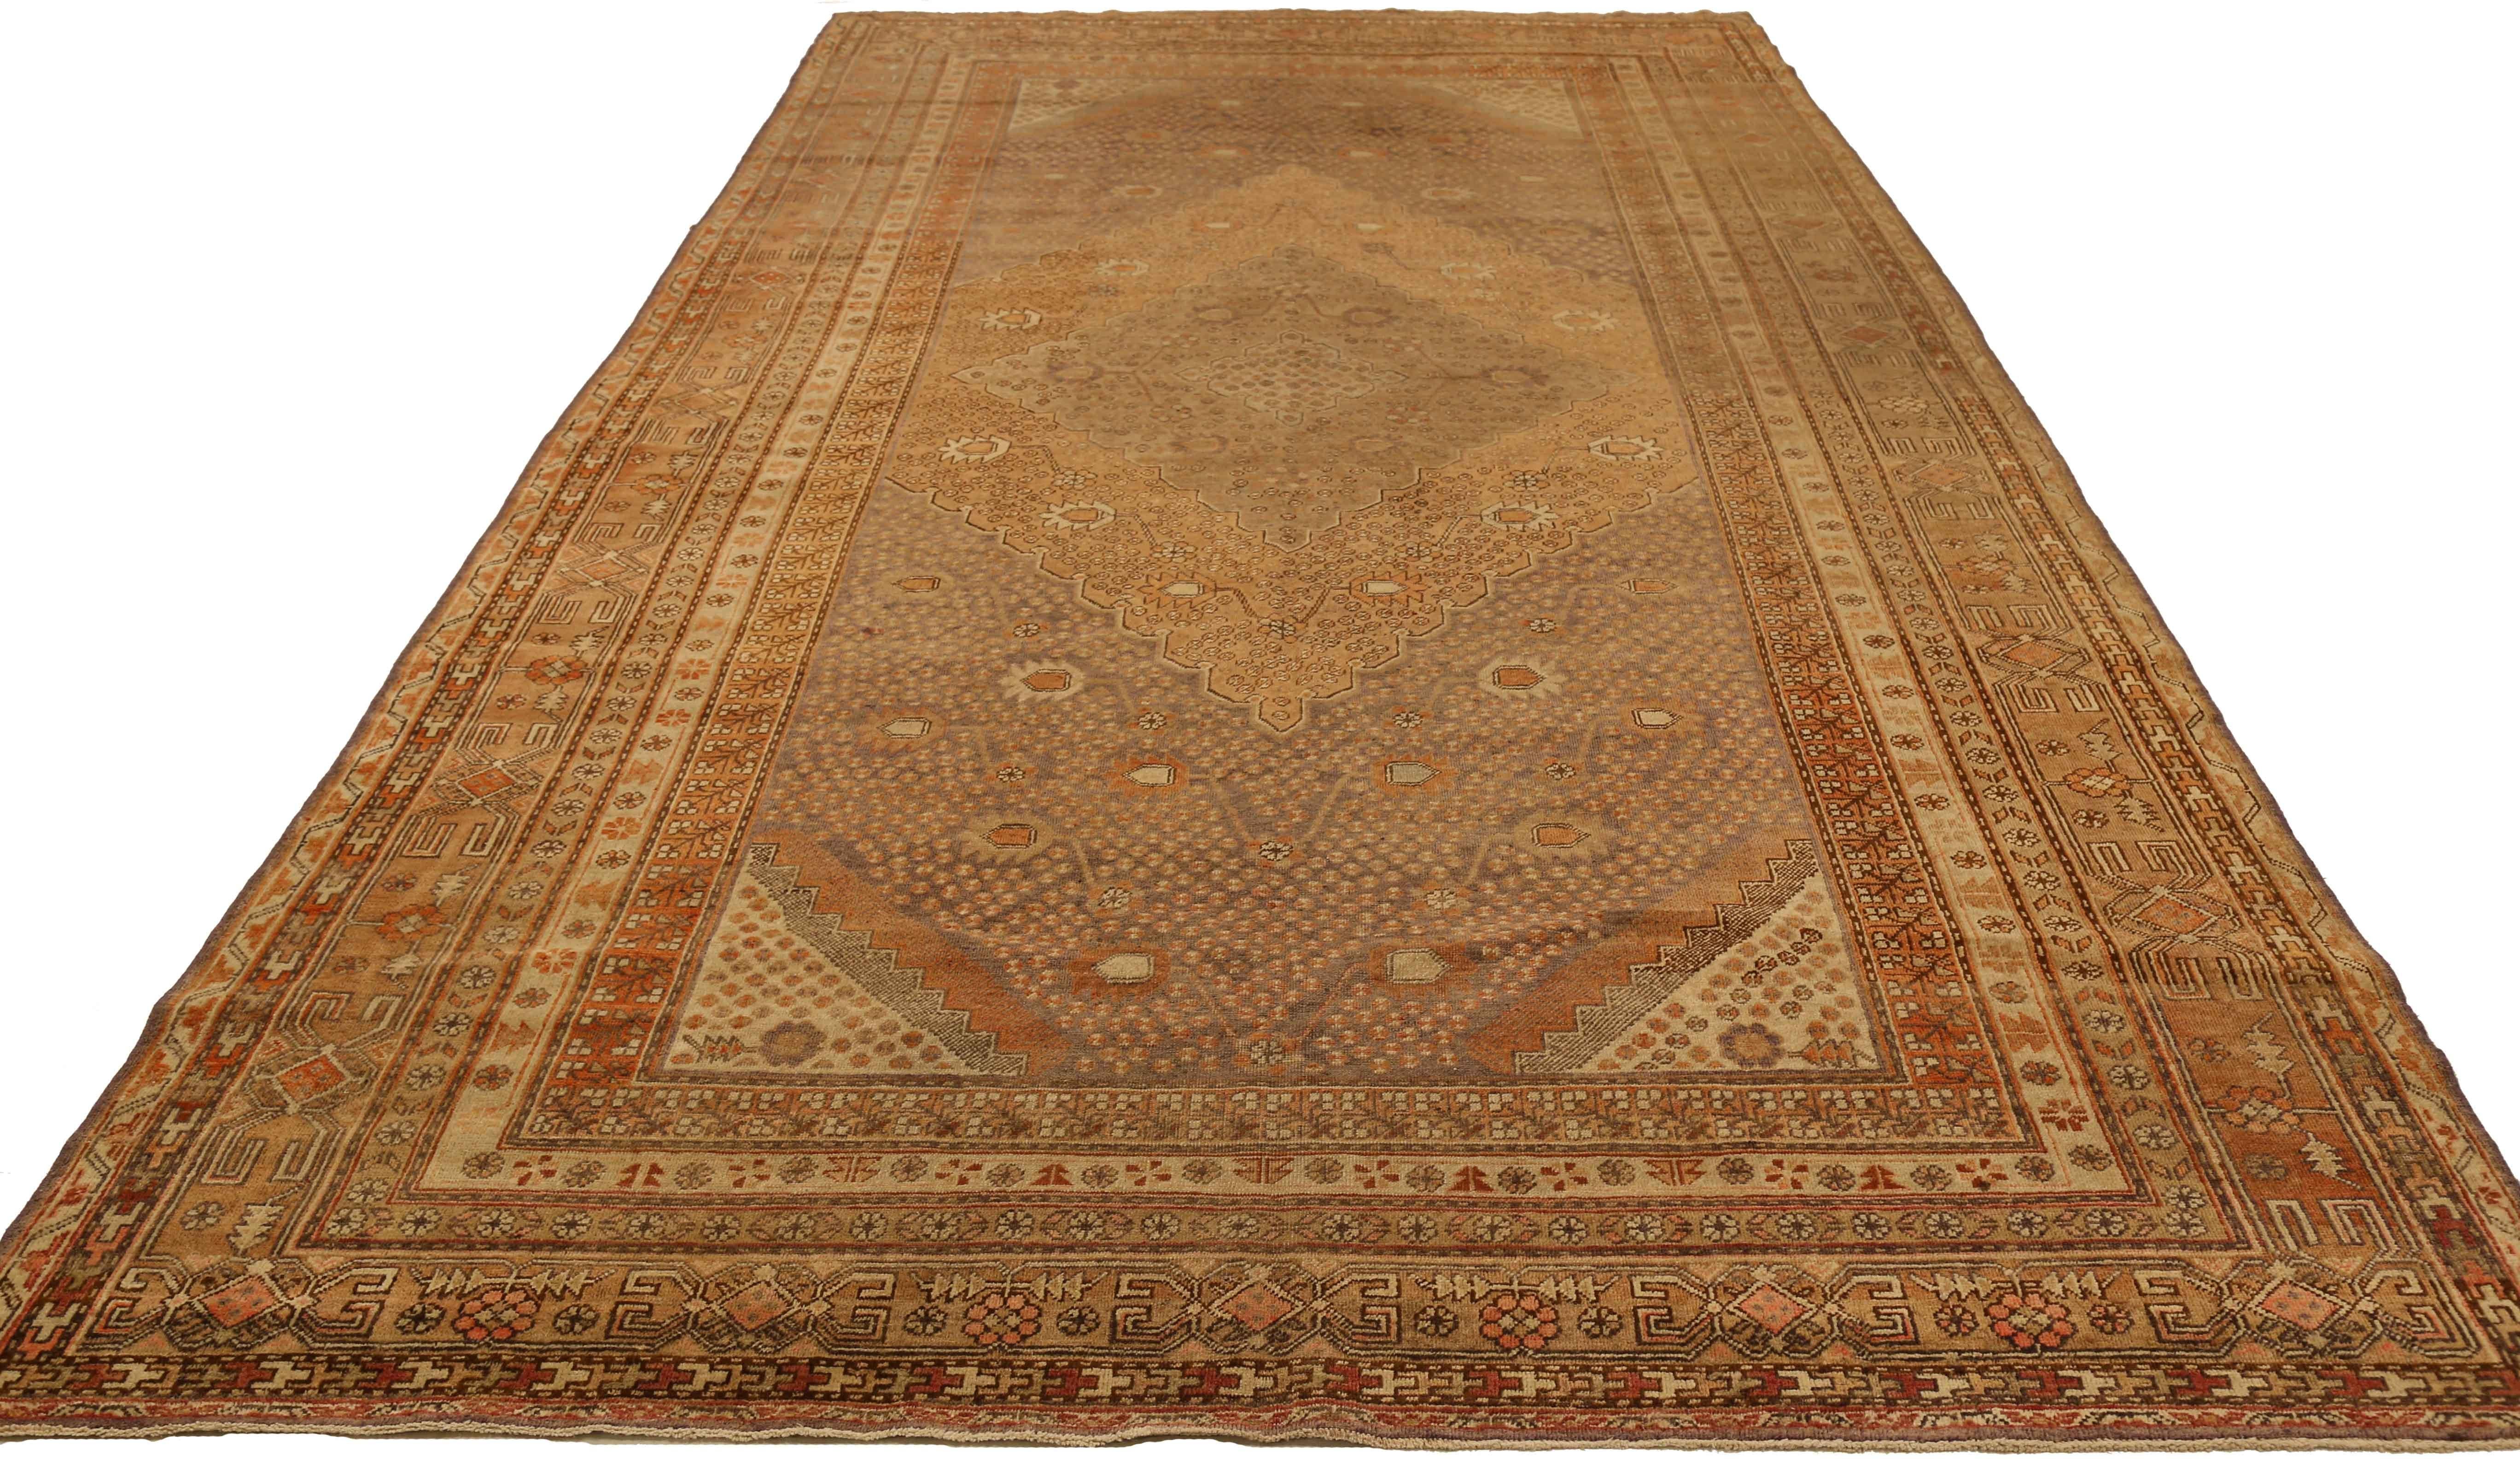 Antique Russian rug handwoven from the finest sheep’s wool and colored with all-natural vegetable dyes that are safe for humans and pets. Its woven using Khotan design featuring floral details in ivory and brown arranged in a diamond shape. It’s a